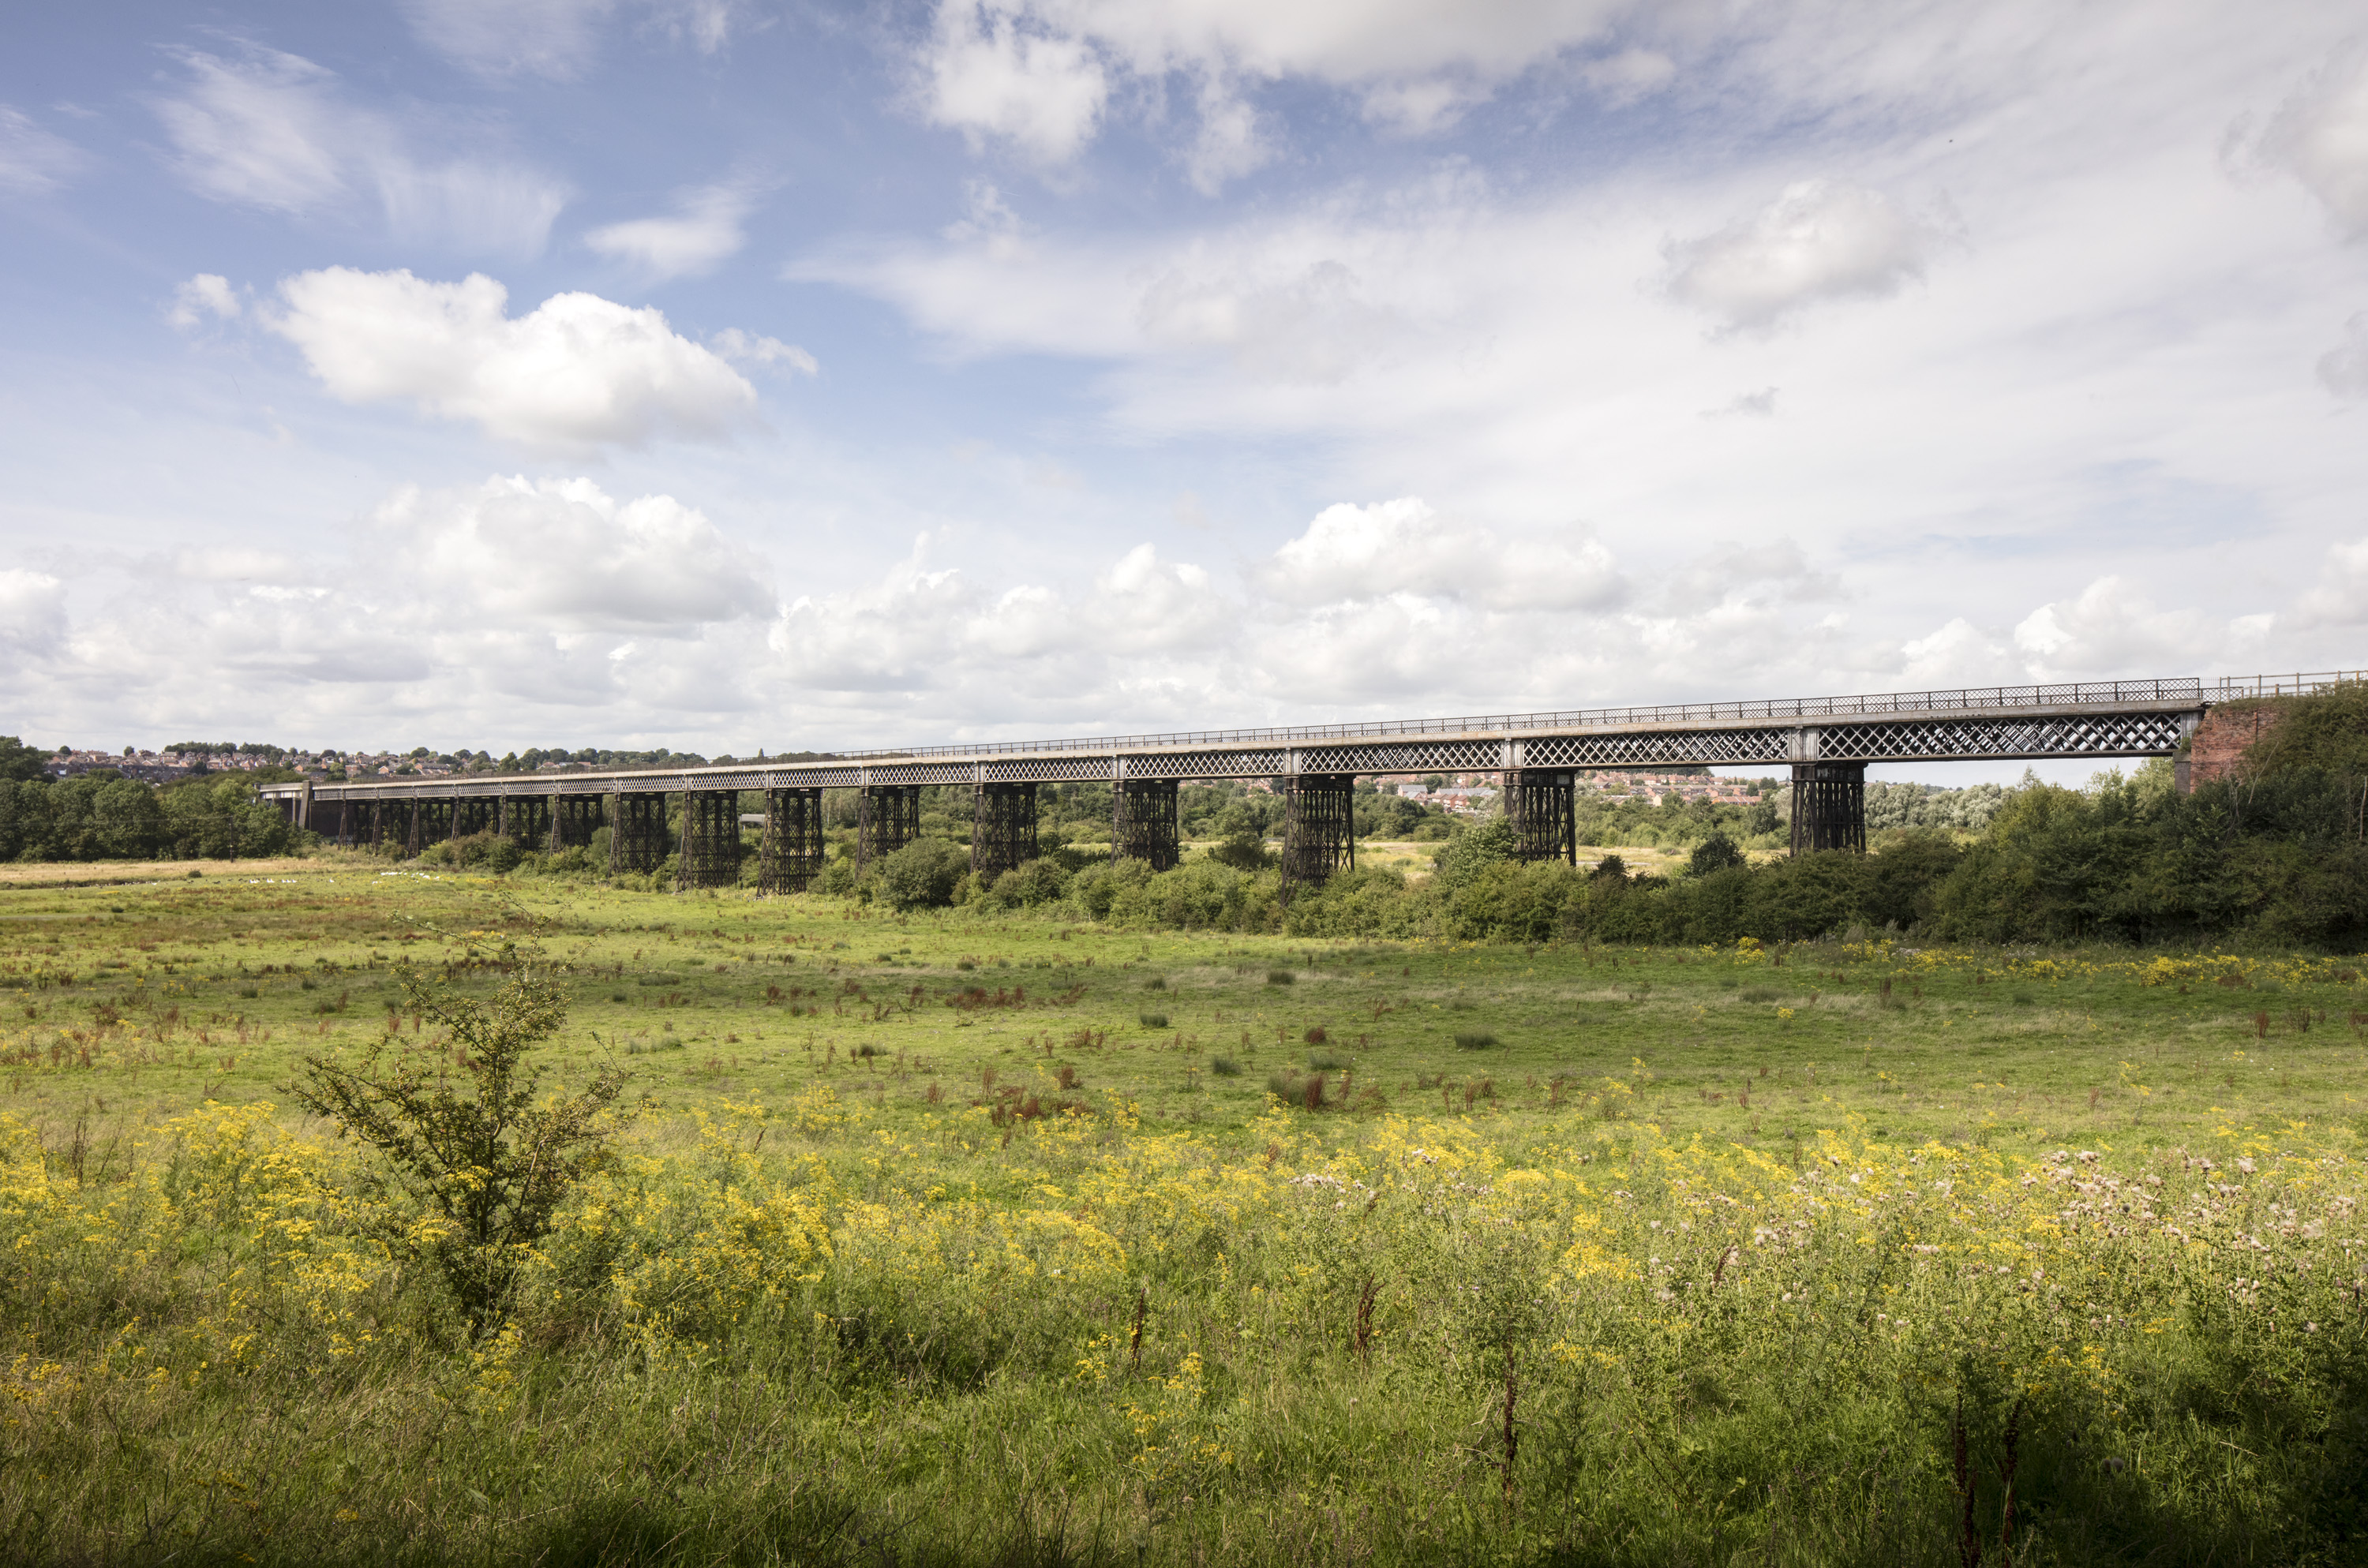 Bennerley Viaduct photographed from a distance with a field with yellow flowers in the foreground